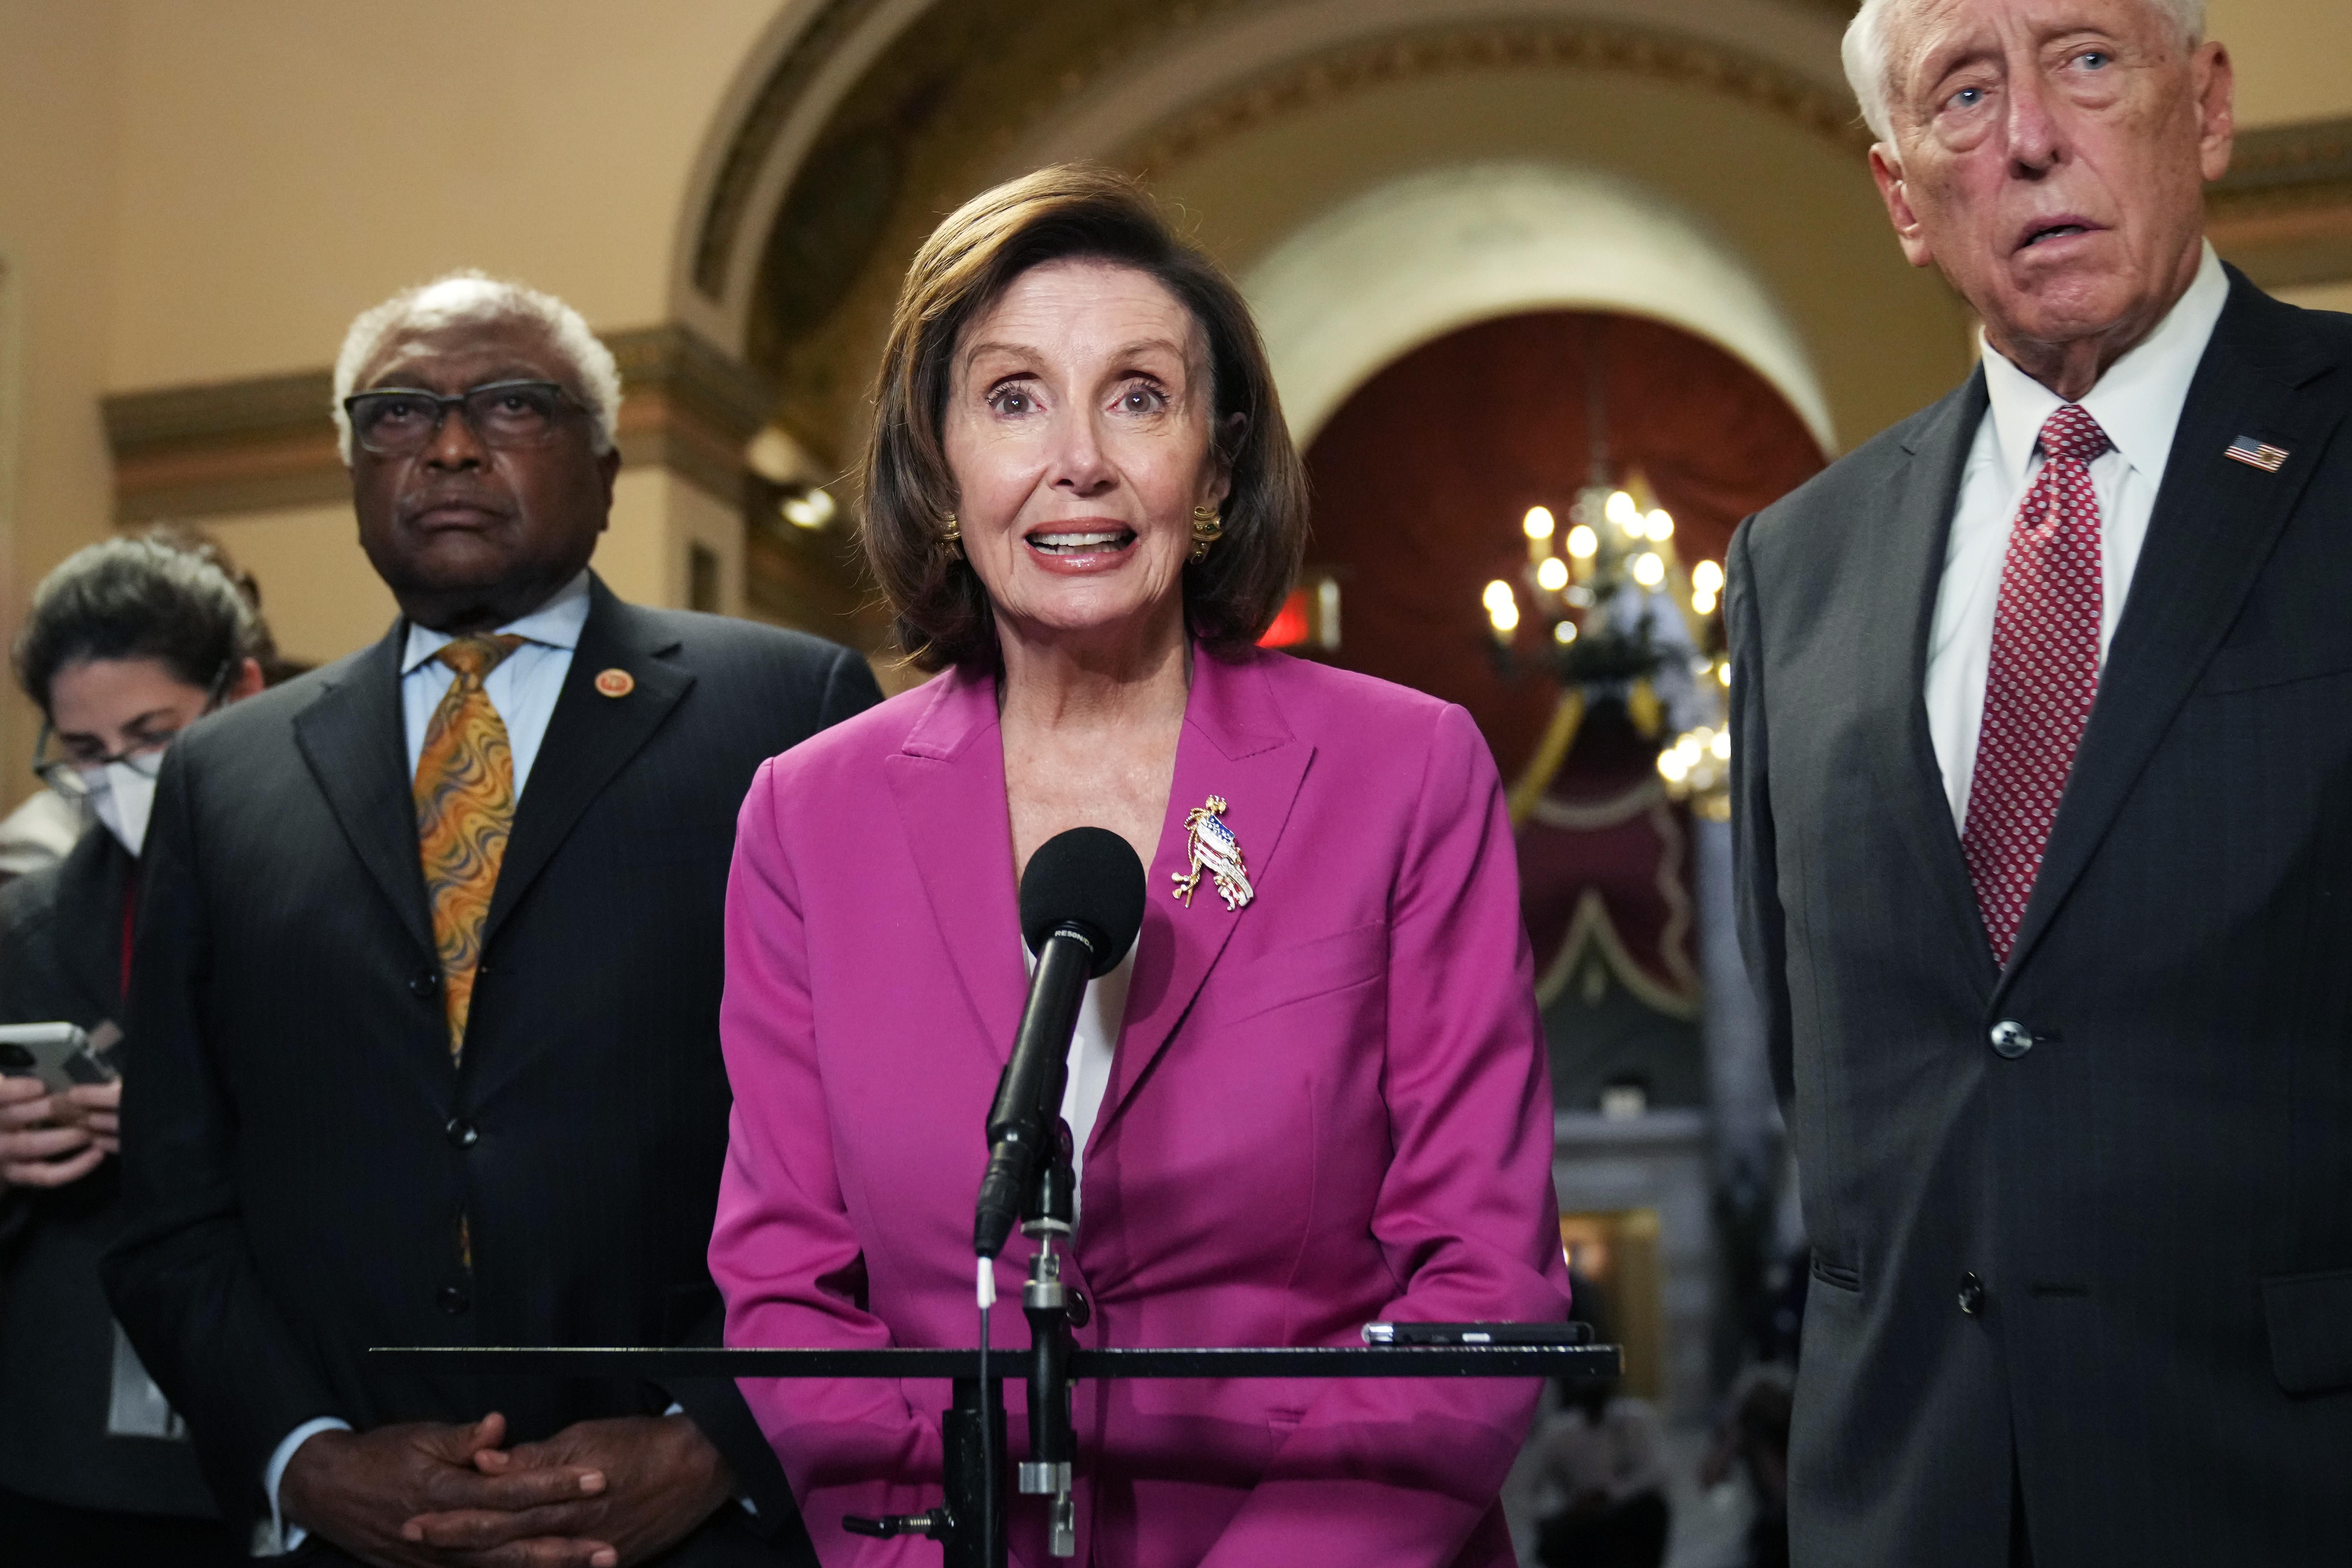 House Speaker Nancy Pelosi (D-Calif.), House Majority Leader Steny Hoyer (D-Md.), and House Majority Whip Jim Clyburn (D-S.C.) hold a press conference in the U.S. Capitol on Friday, November 5, 2021. (Photo: Tom Williams/CQ-Roll Call, Inc via Getty Images)